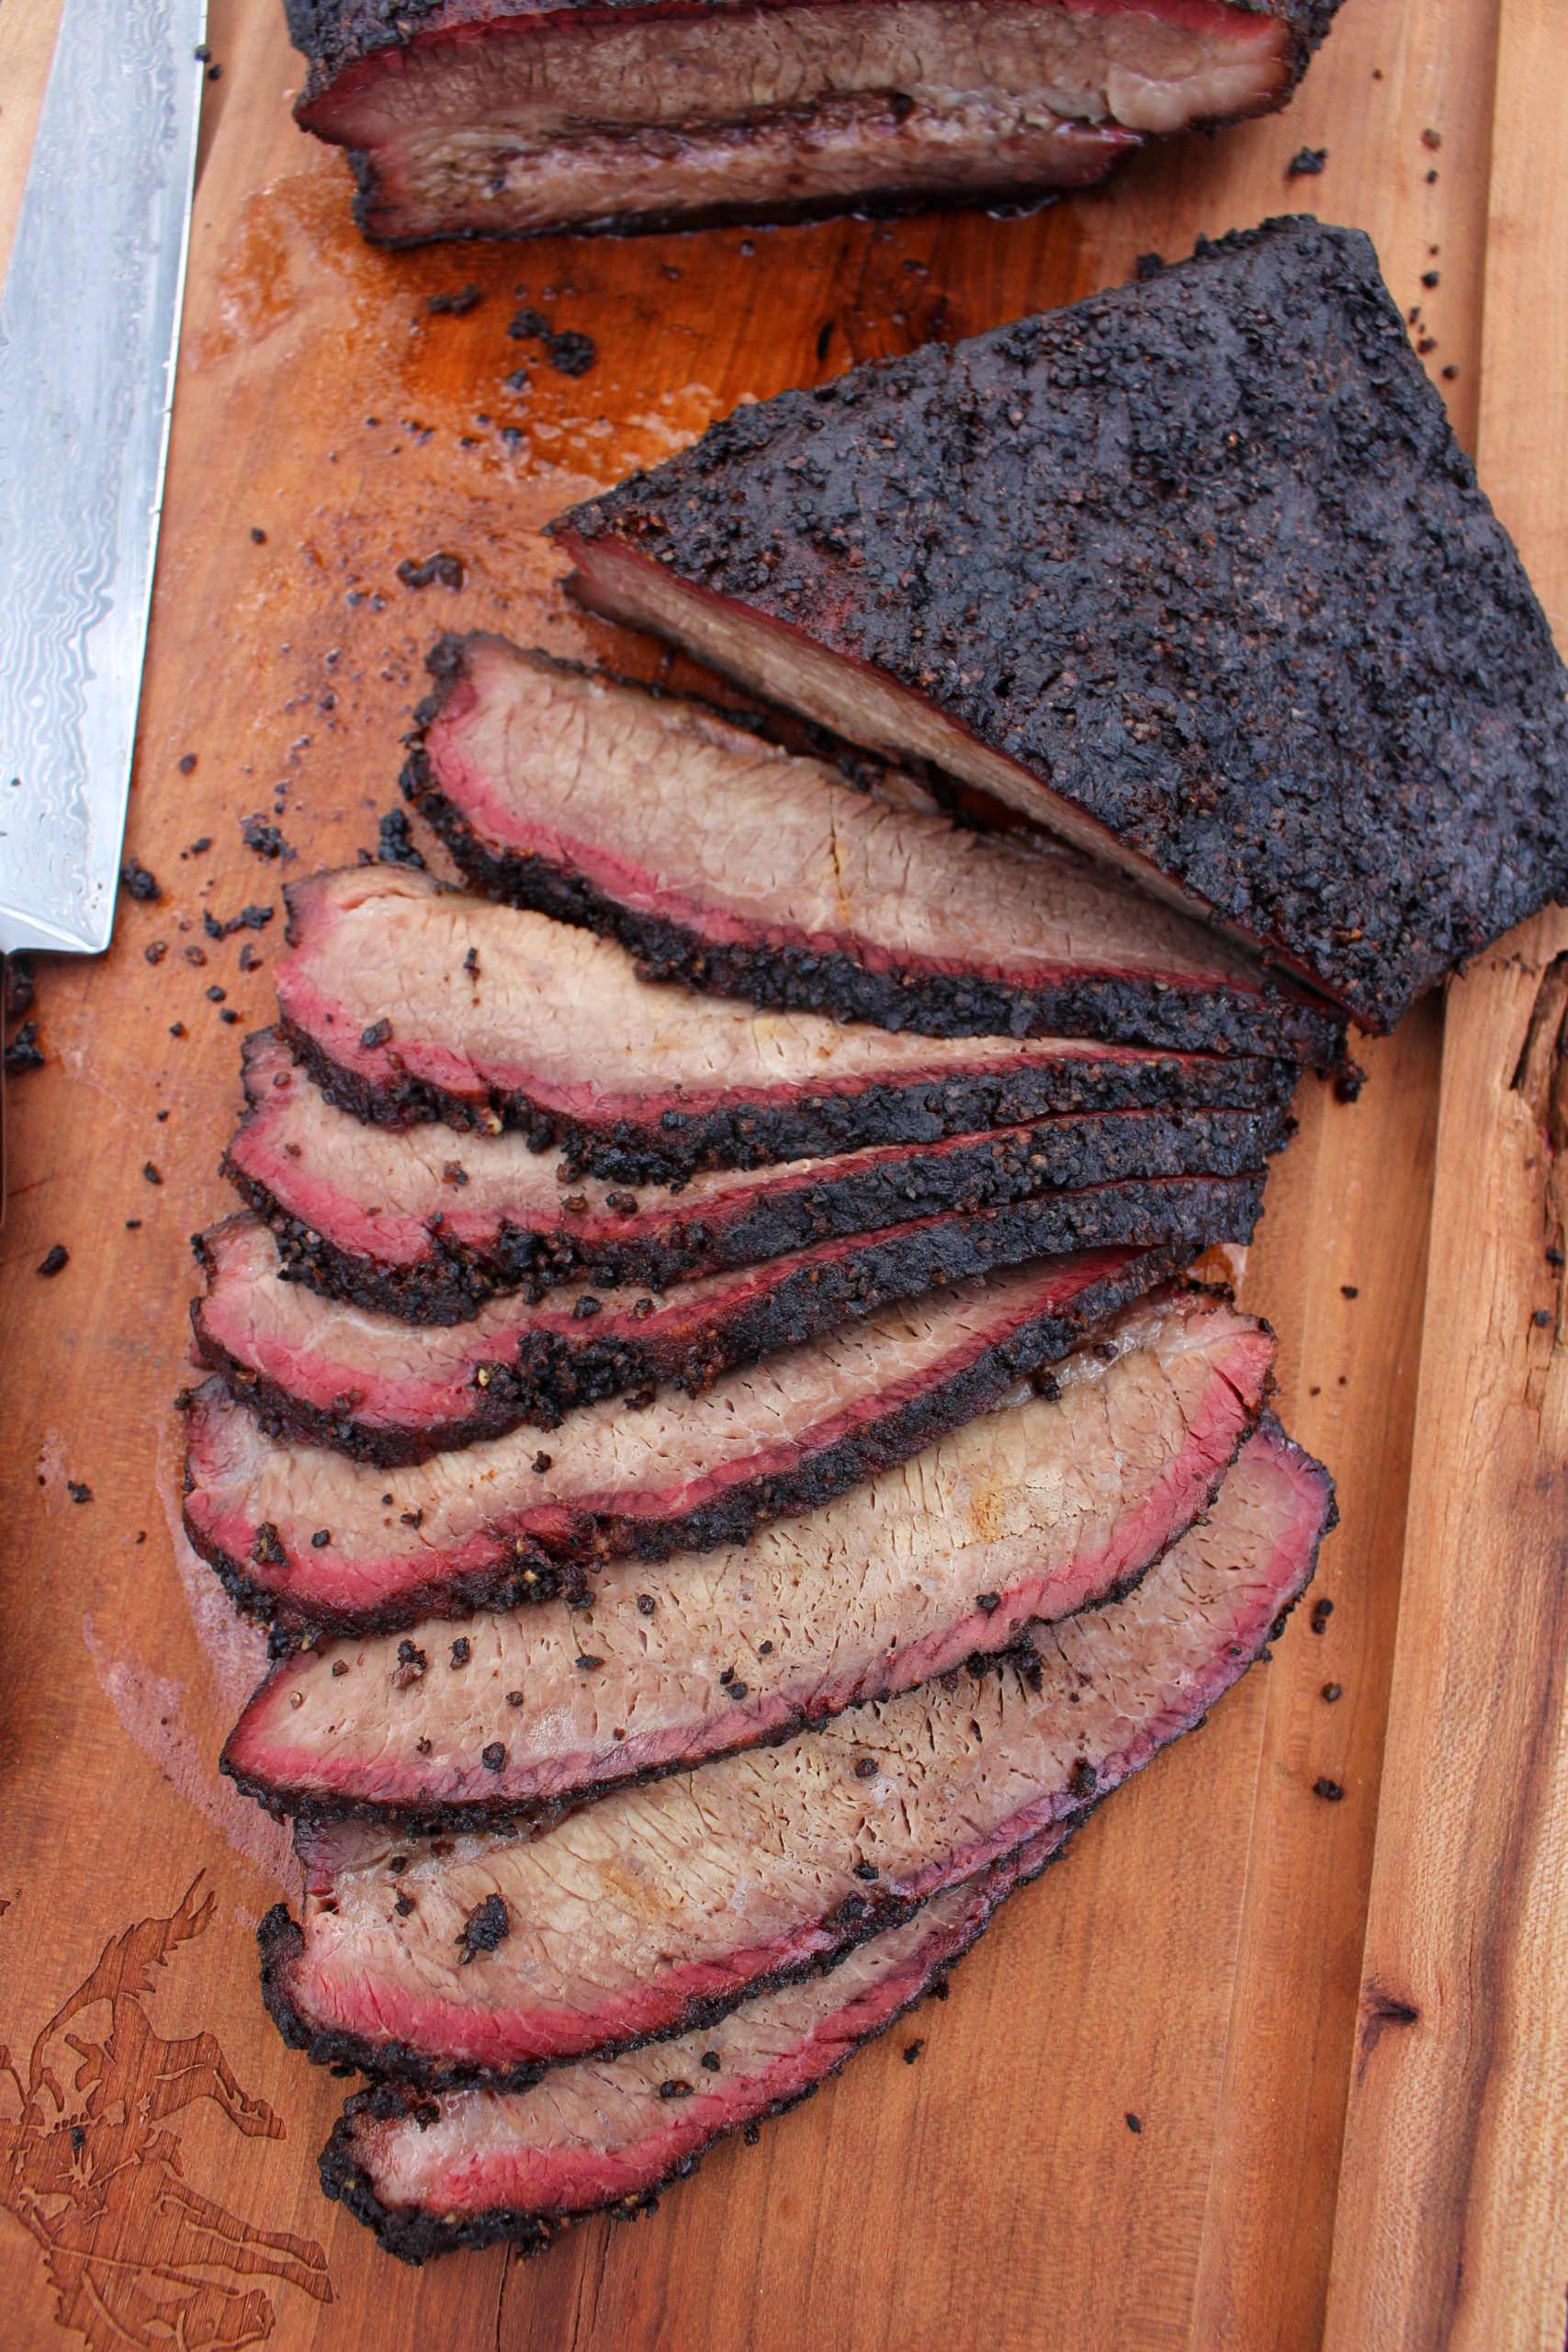 An overhead shot of the sliced easy smoked brisket.